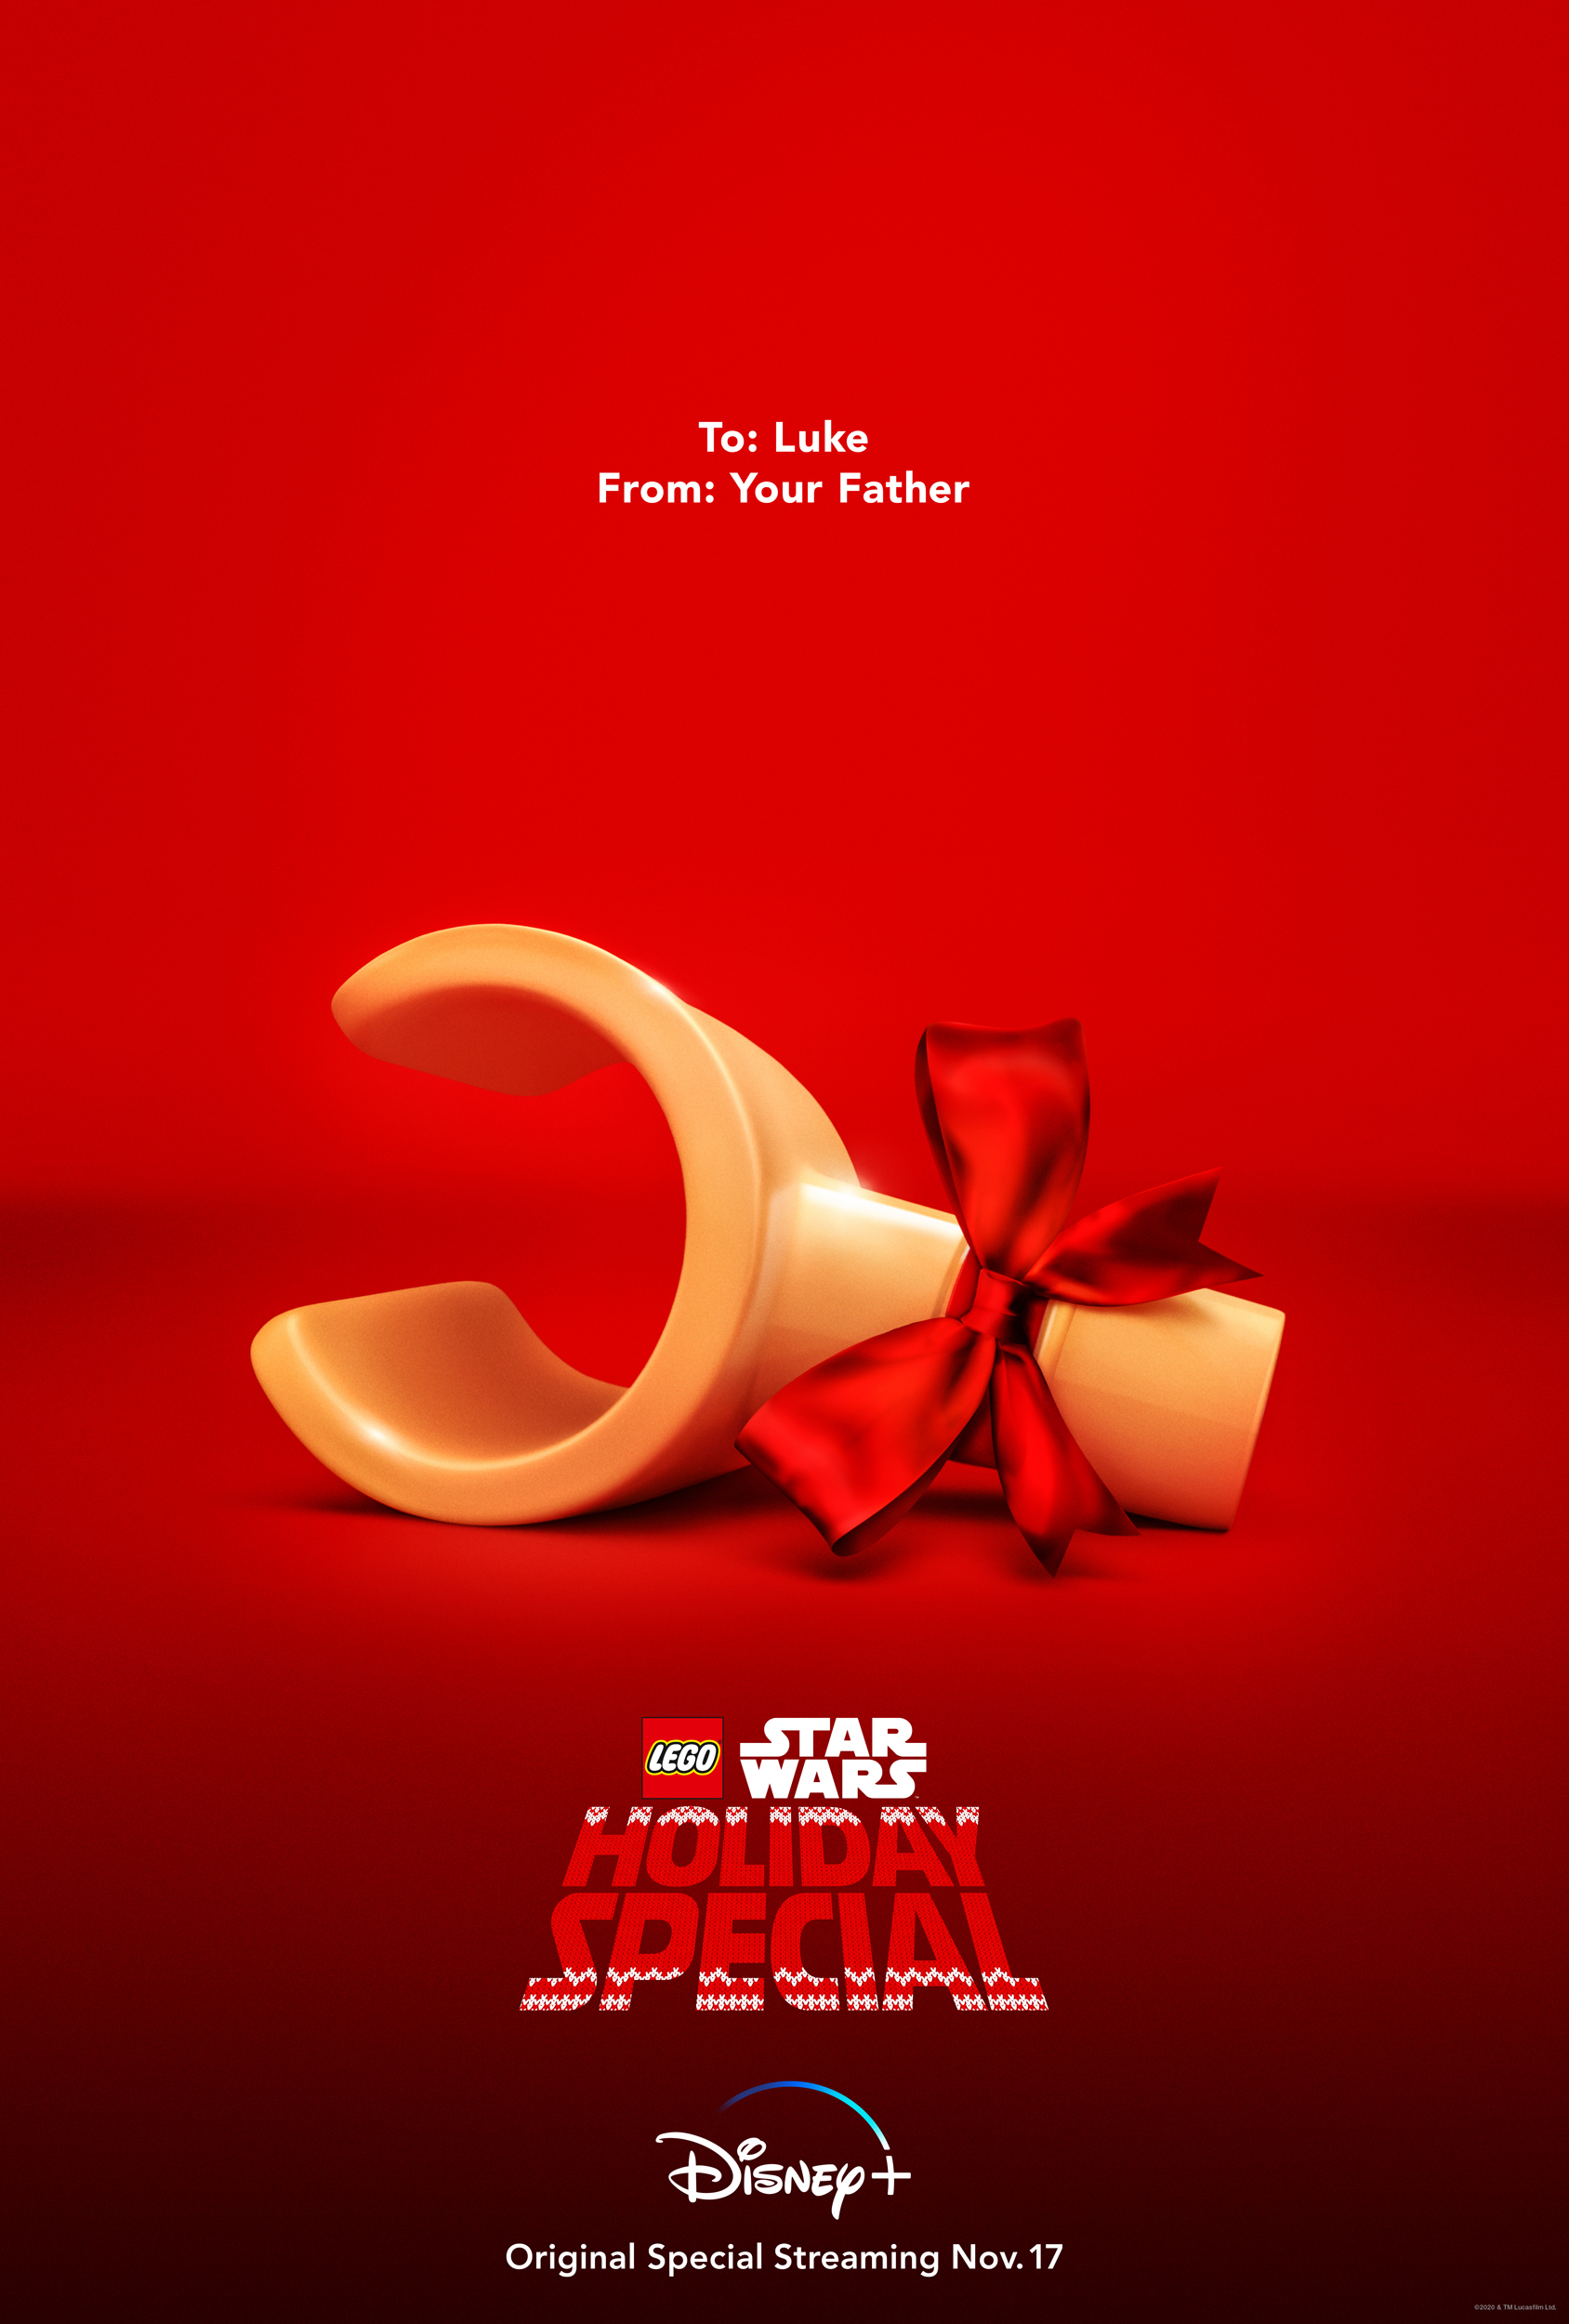 lego star wars holiday special disney plus teaser poster